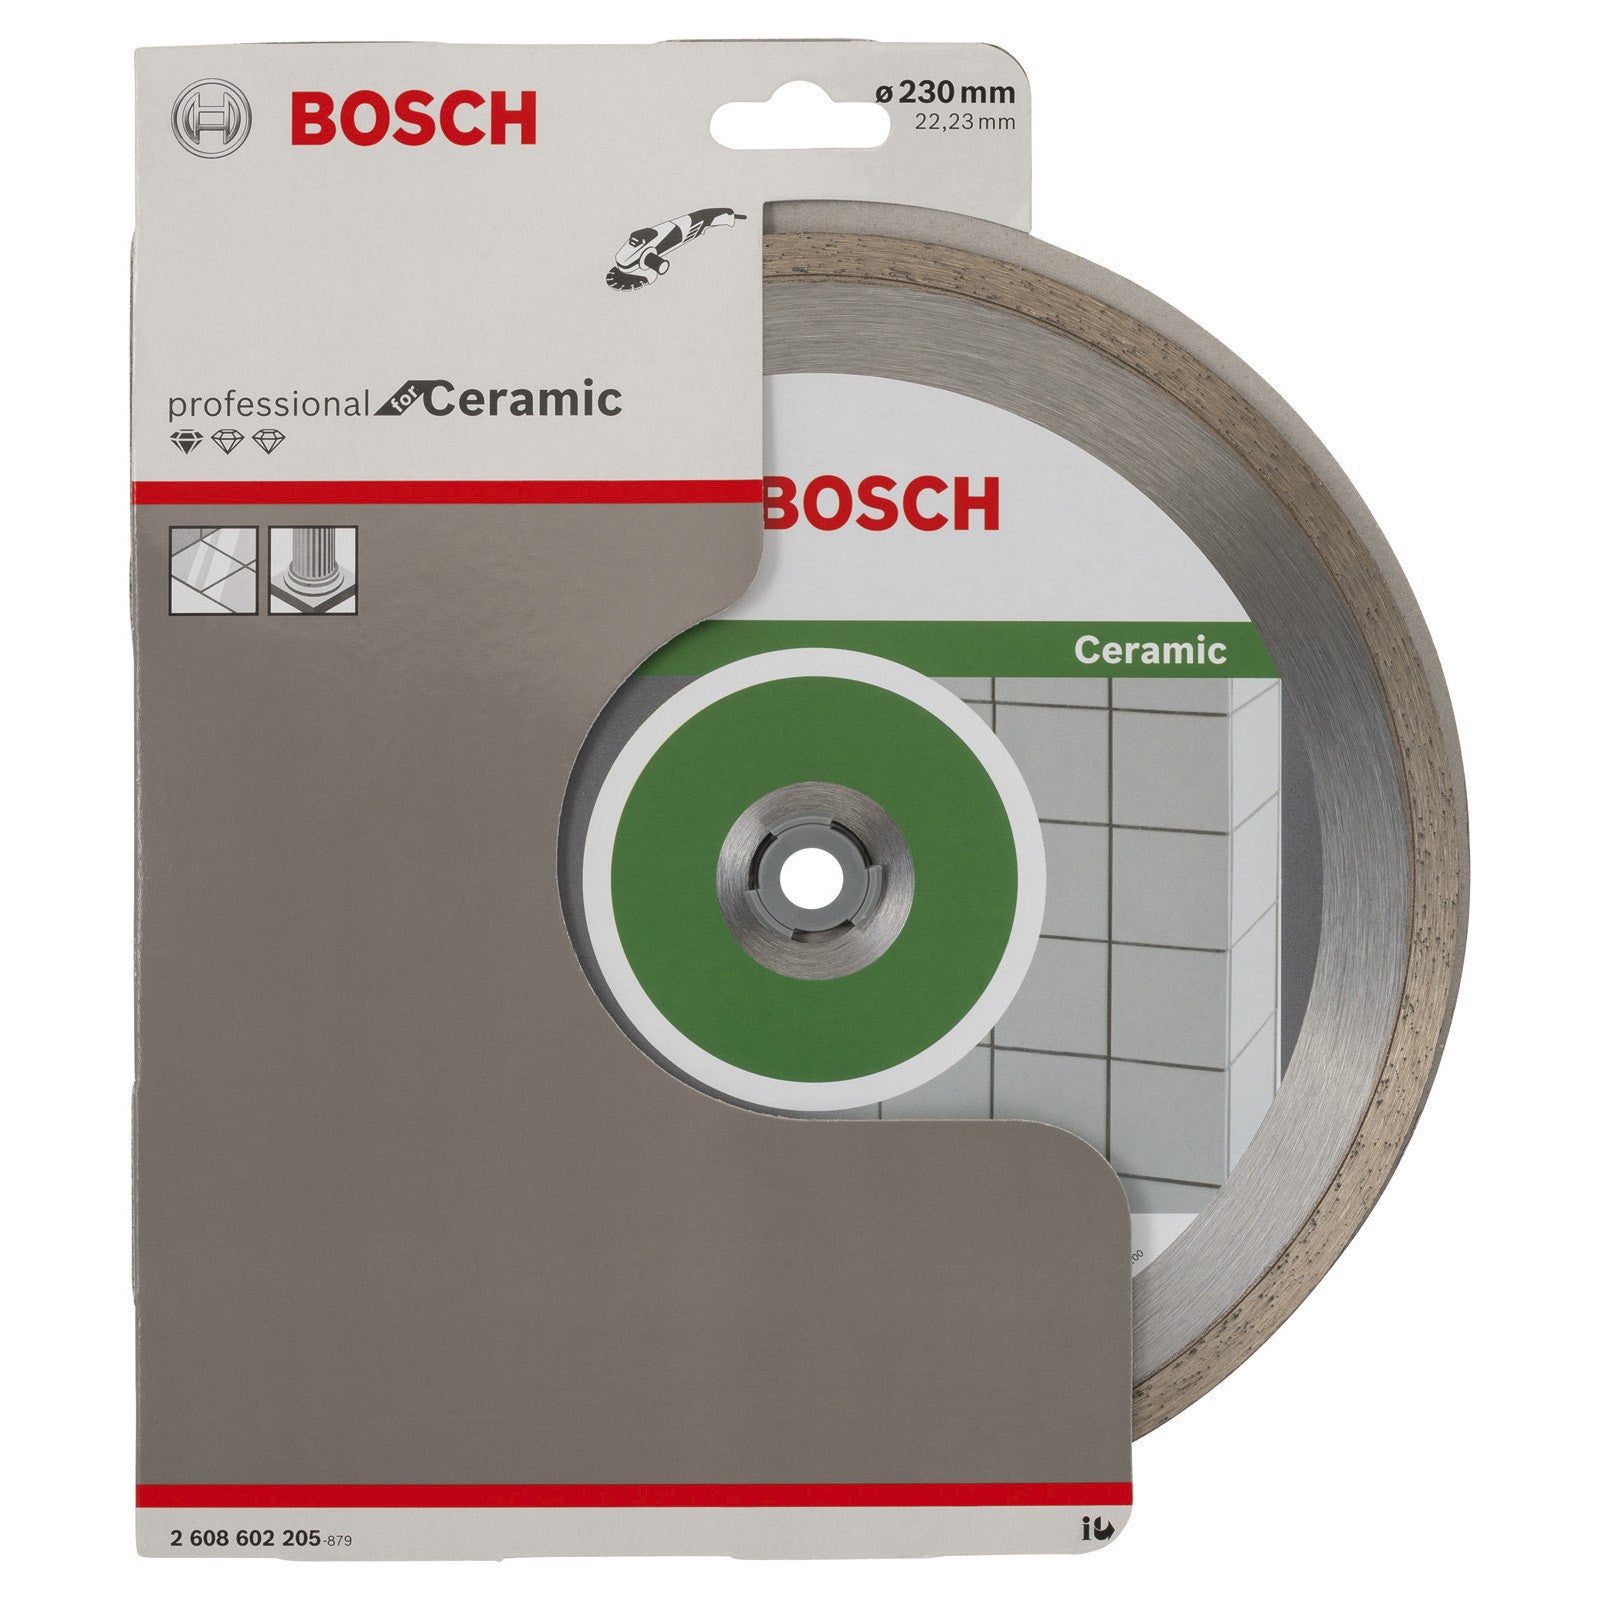 Bosch Standard for Ceramic 230 x 22,23 x 1,6 x 7 continuous rim 2608602205 Power Tool Services